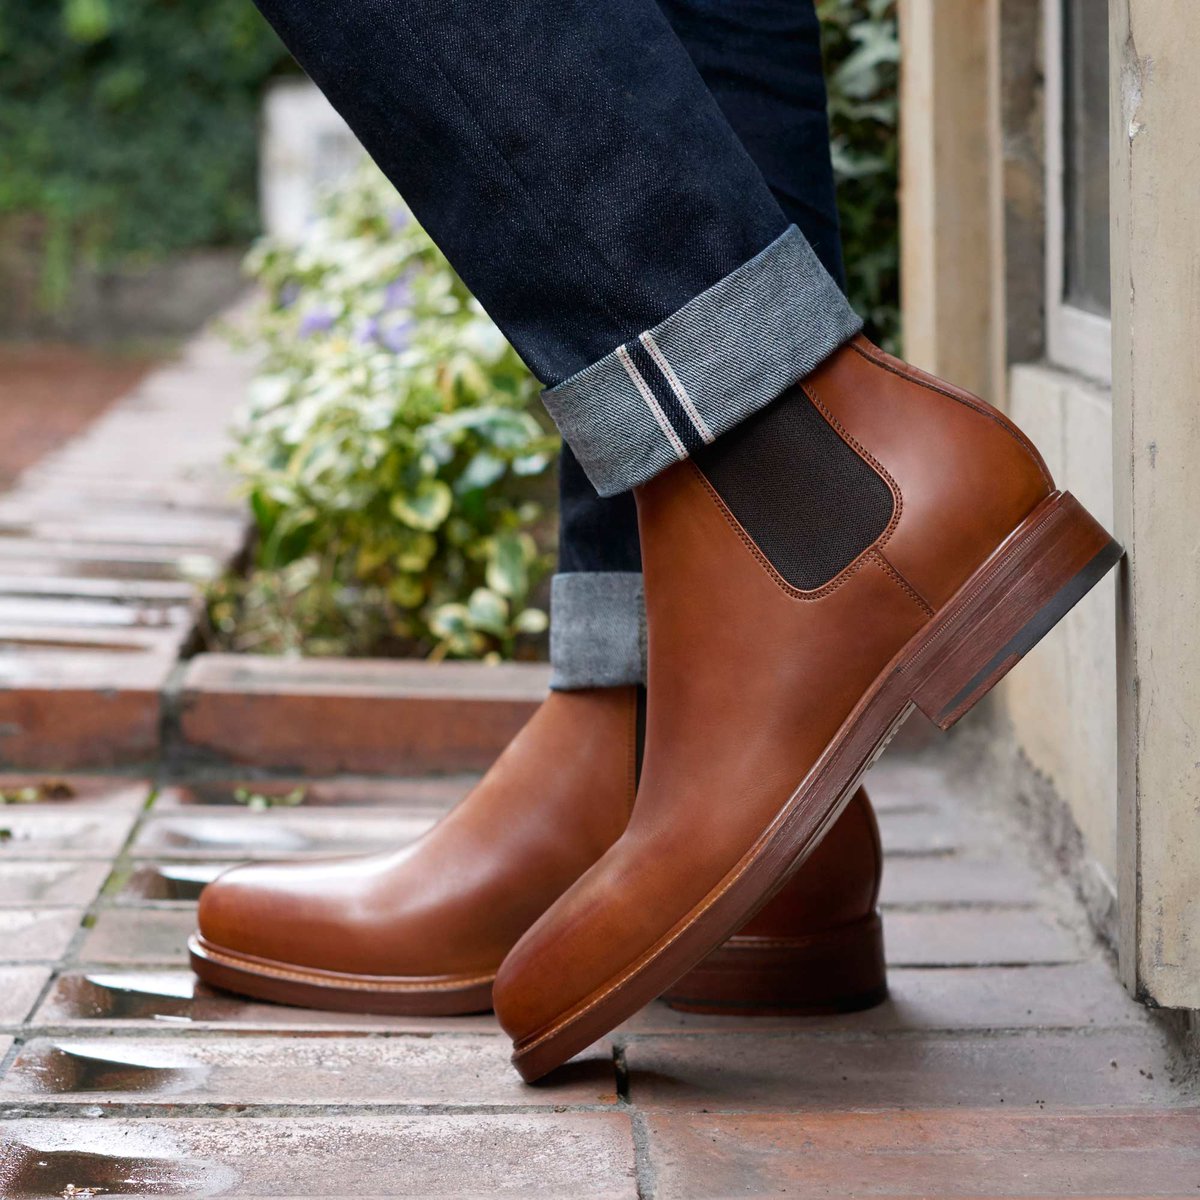 All Bolton Chelsea boots are made from 